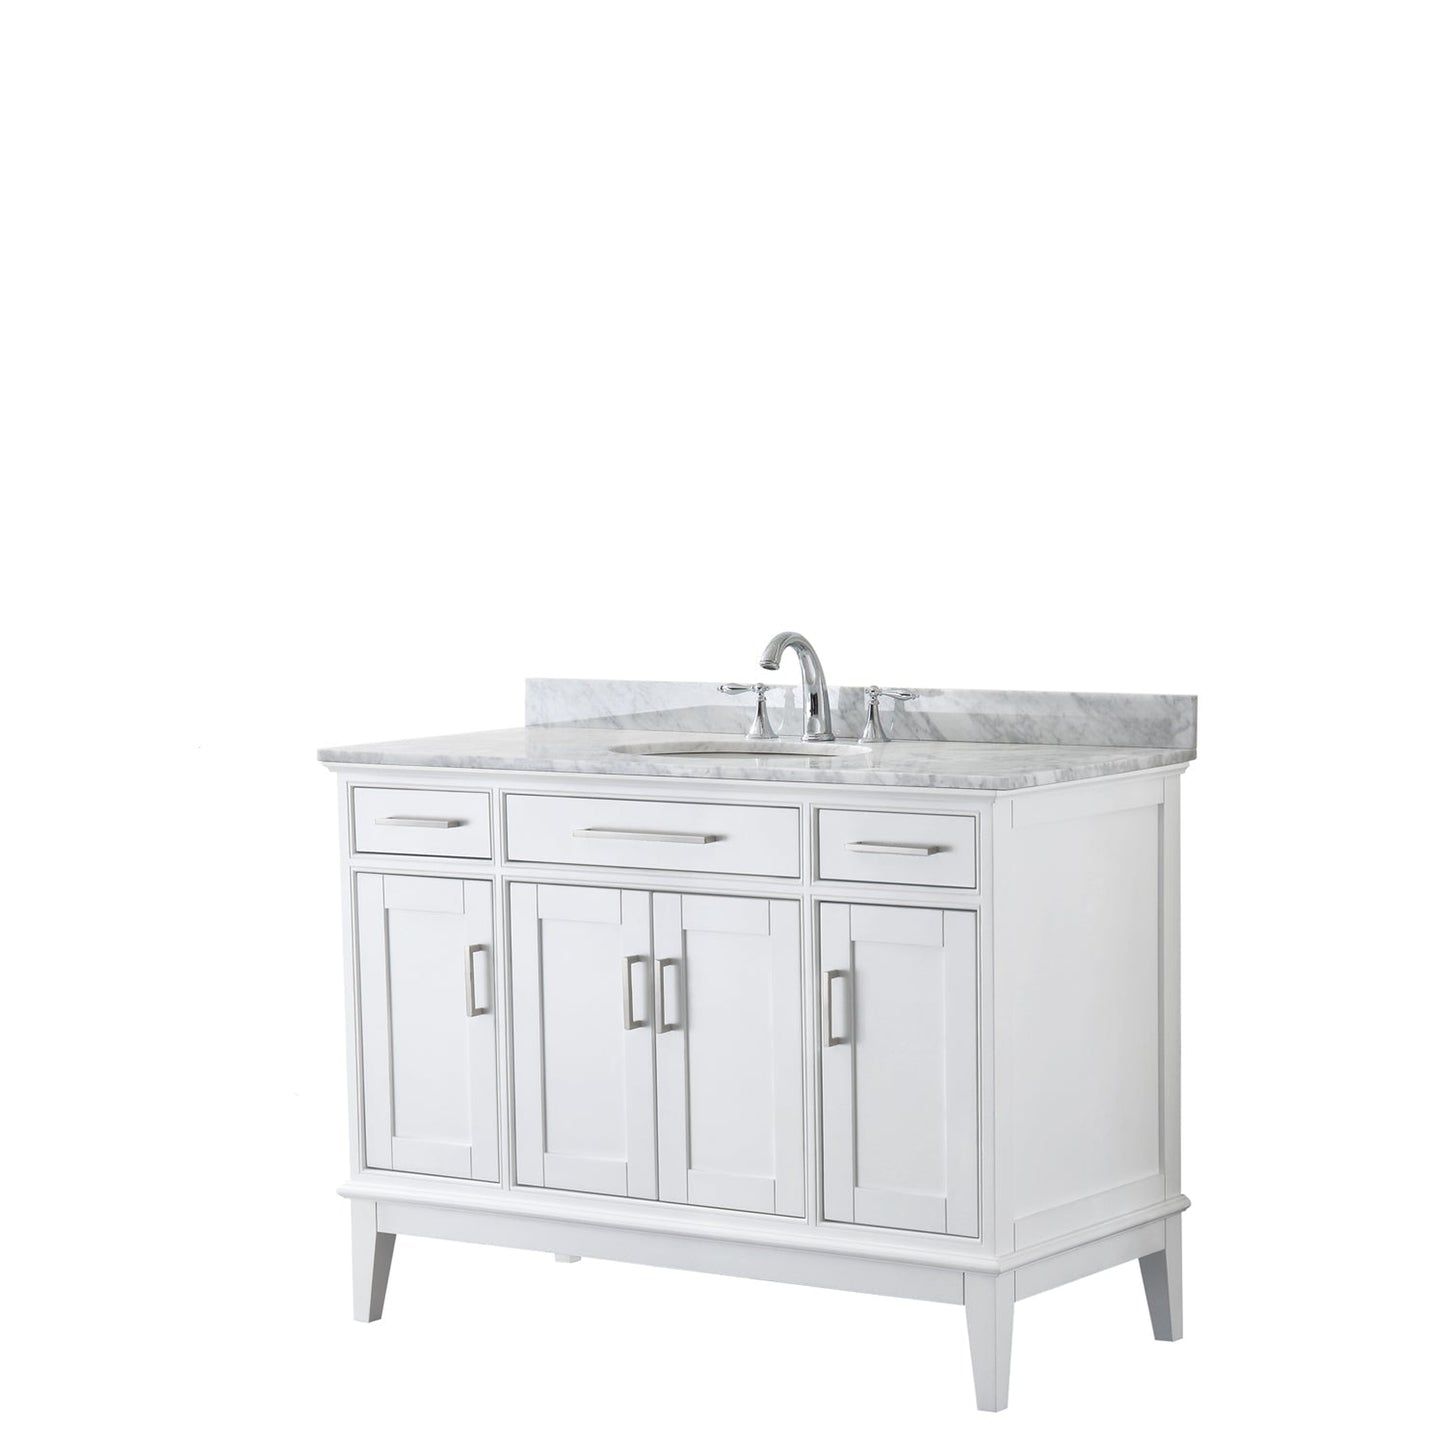 Wyndham Collection Margate 48" Single Bathroom White Vanity With White Carrara Marble Countertop And Undermount Oval Sink